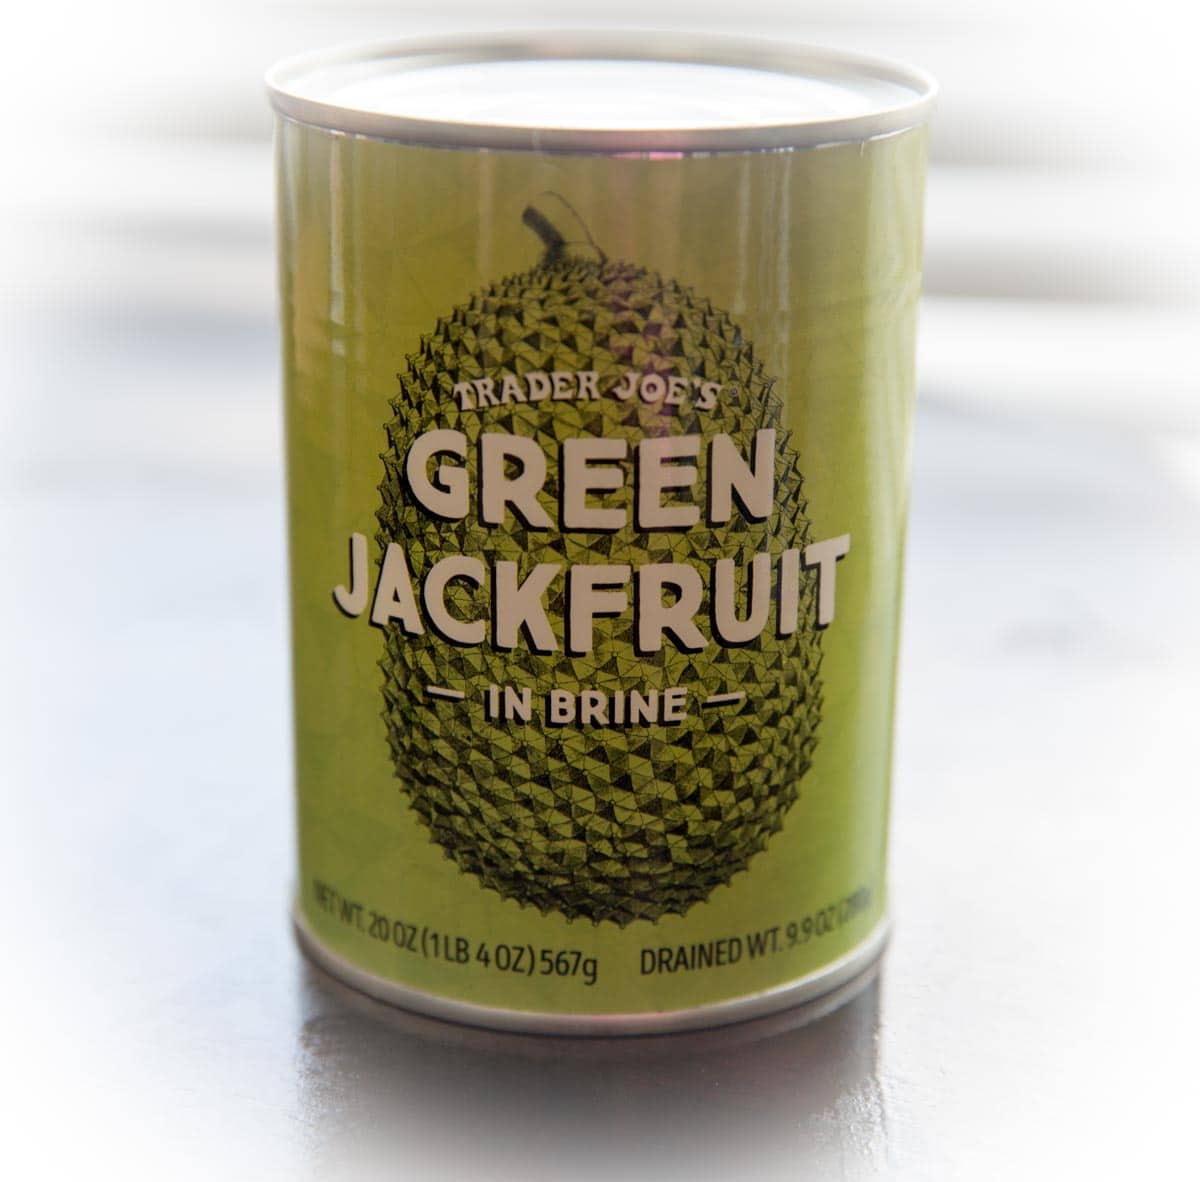 can of green jackfruit in brine from Trader Joe's